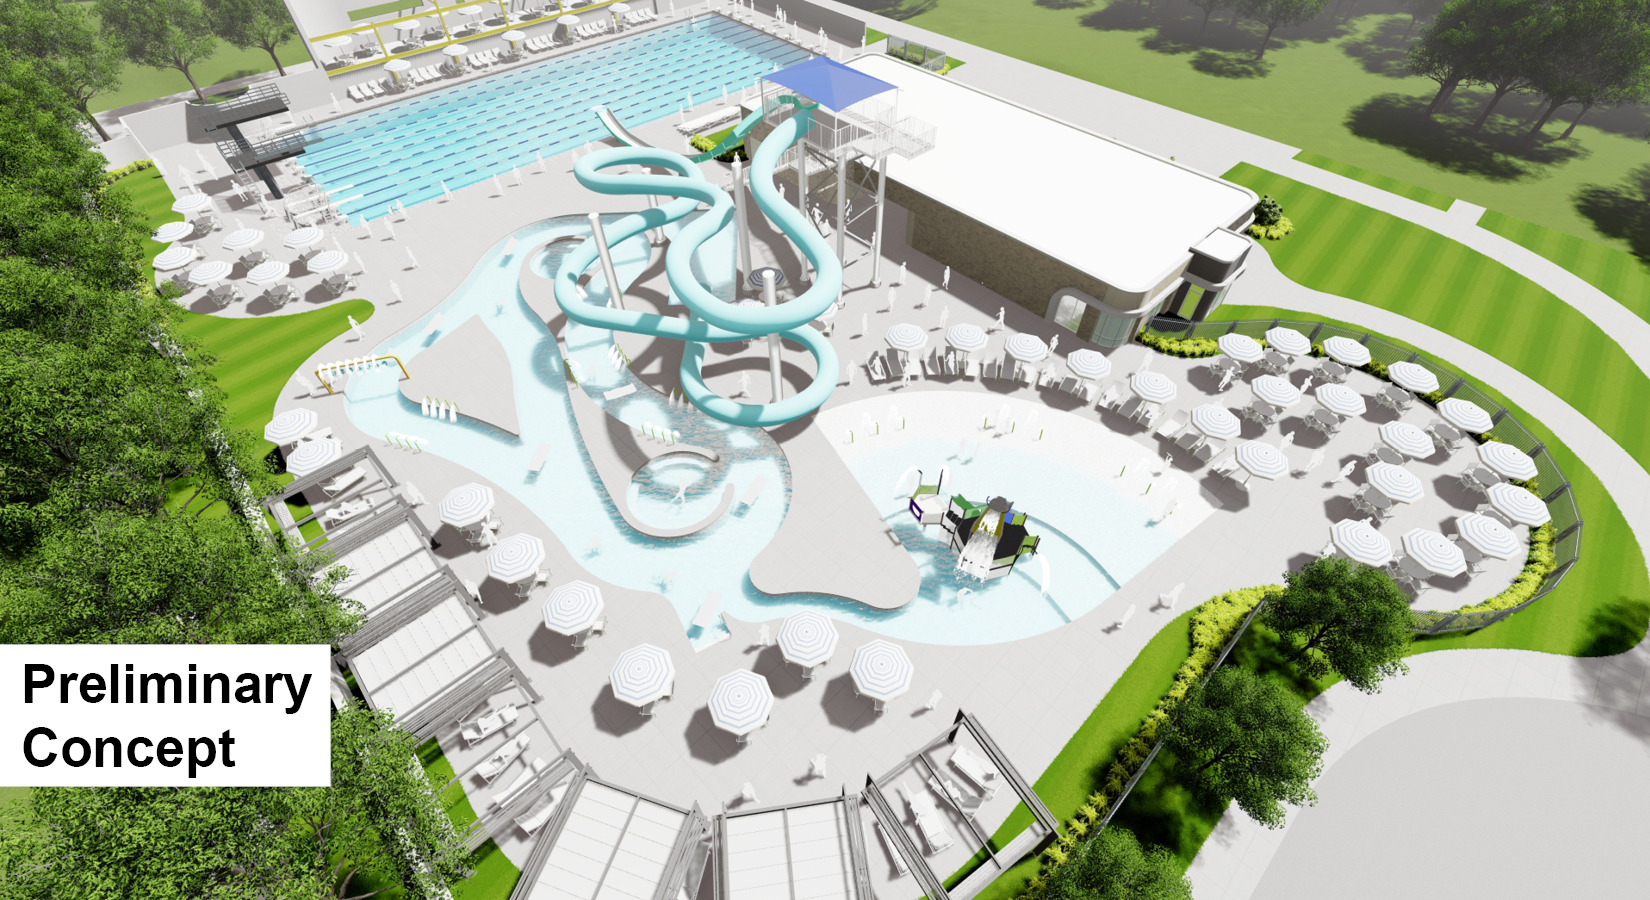 This image shows a preliminary concept of Island Park Pool